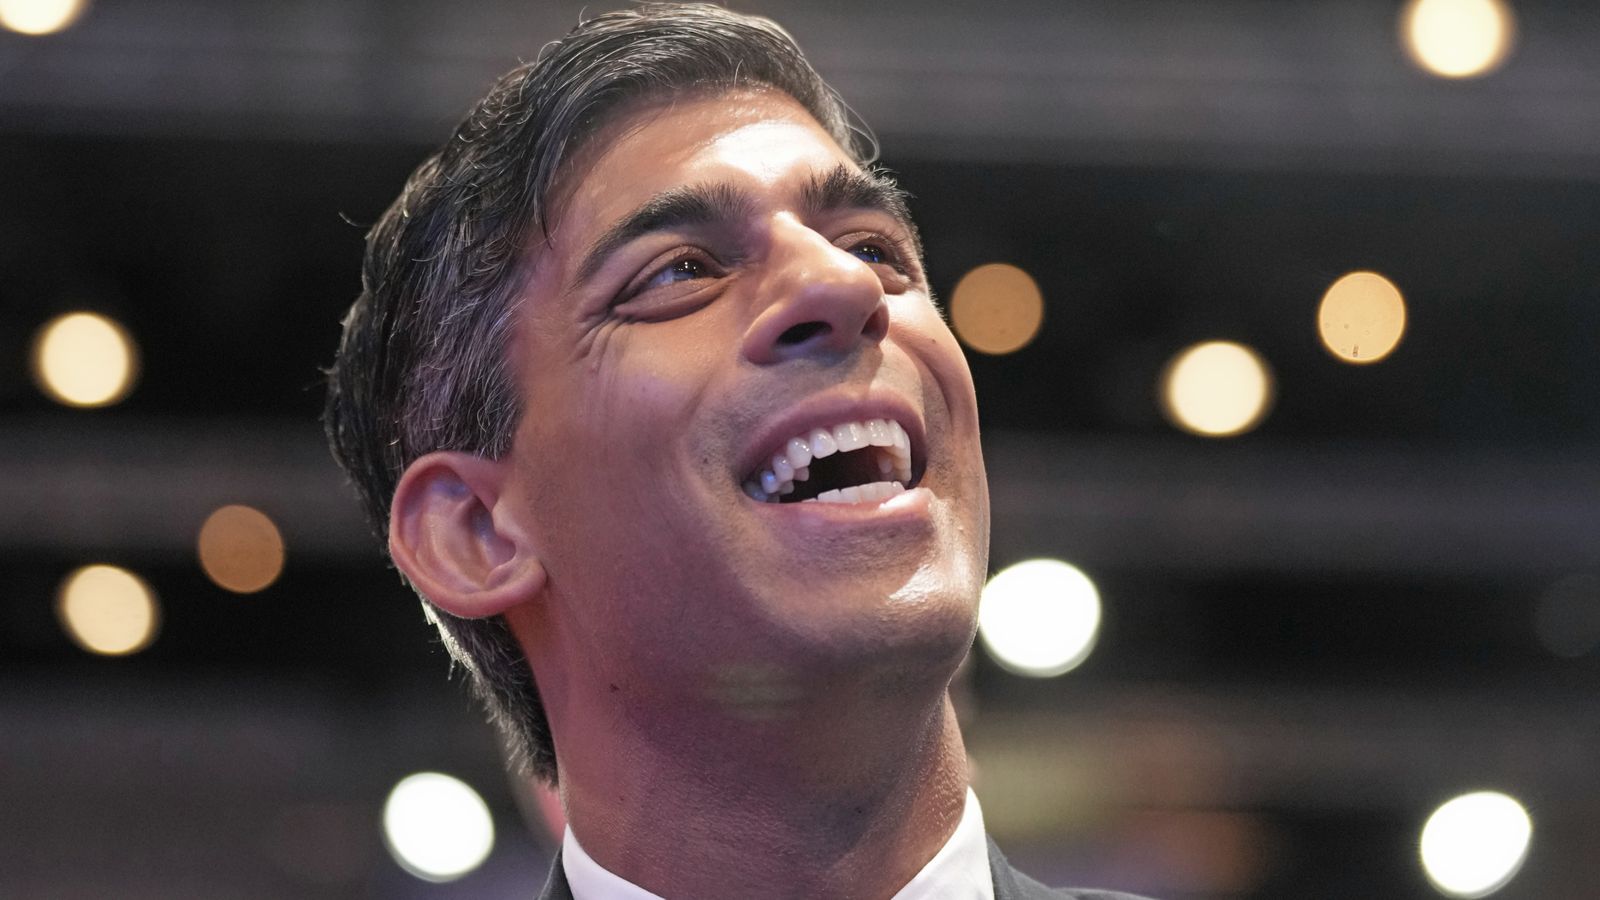 Rishi Sunak: General election 'not what the country wants'